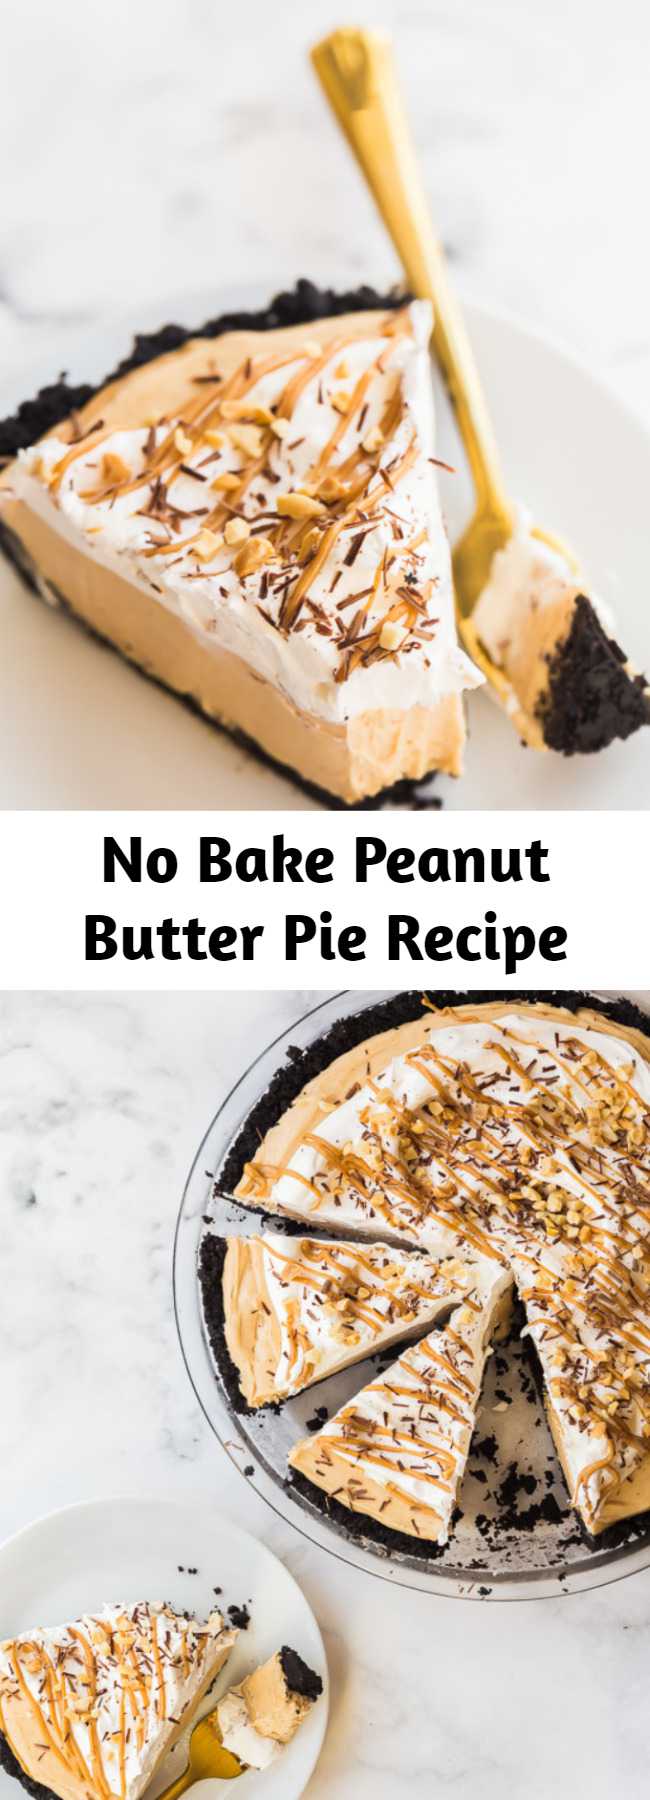 No Bake Peanut Butter Pie Recipe - This Peanut Butter Pie is completely no bake and made with a chocolate Oreo crust, peanut butter cream cheese filling, and topped with more chocolate! #peanutbutter #pie #nobake #dessert #recipes